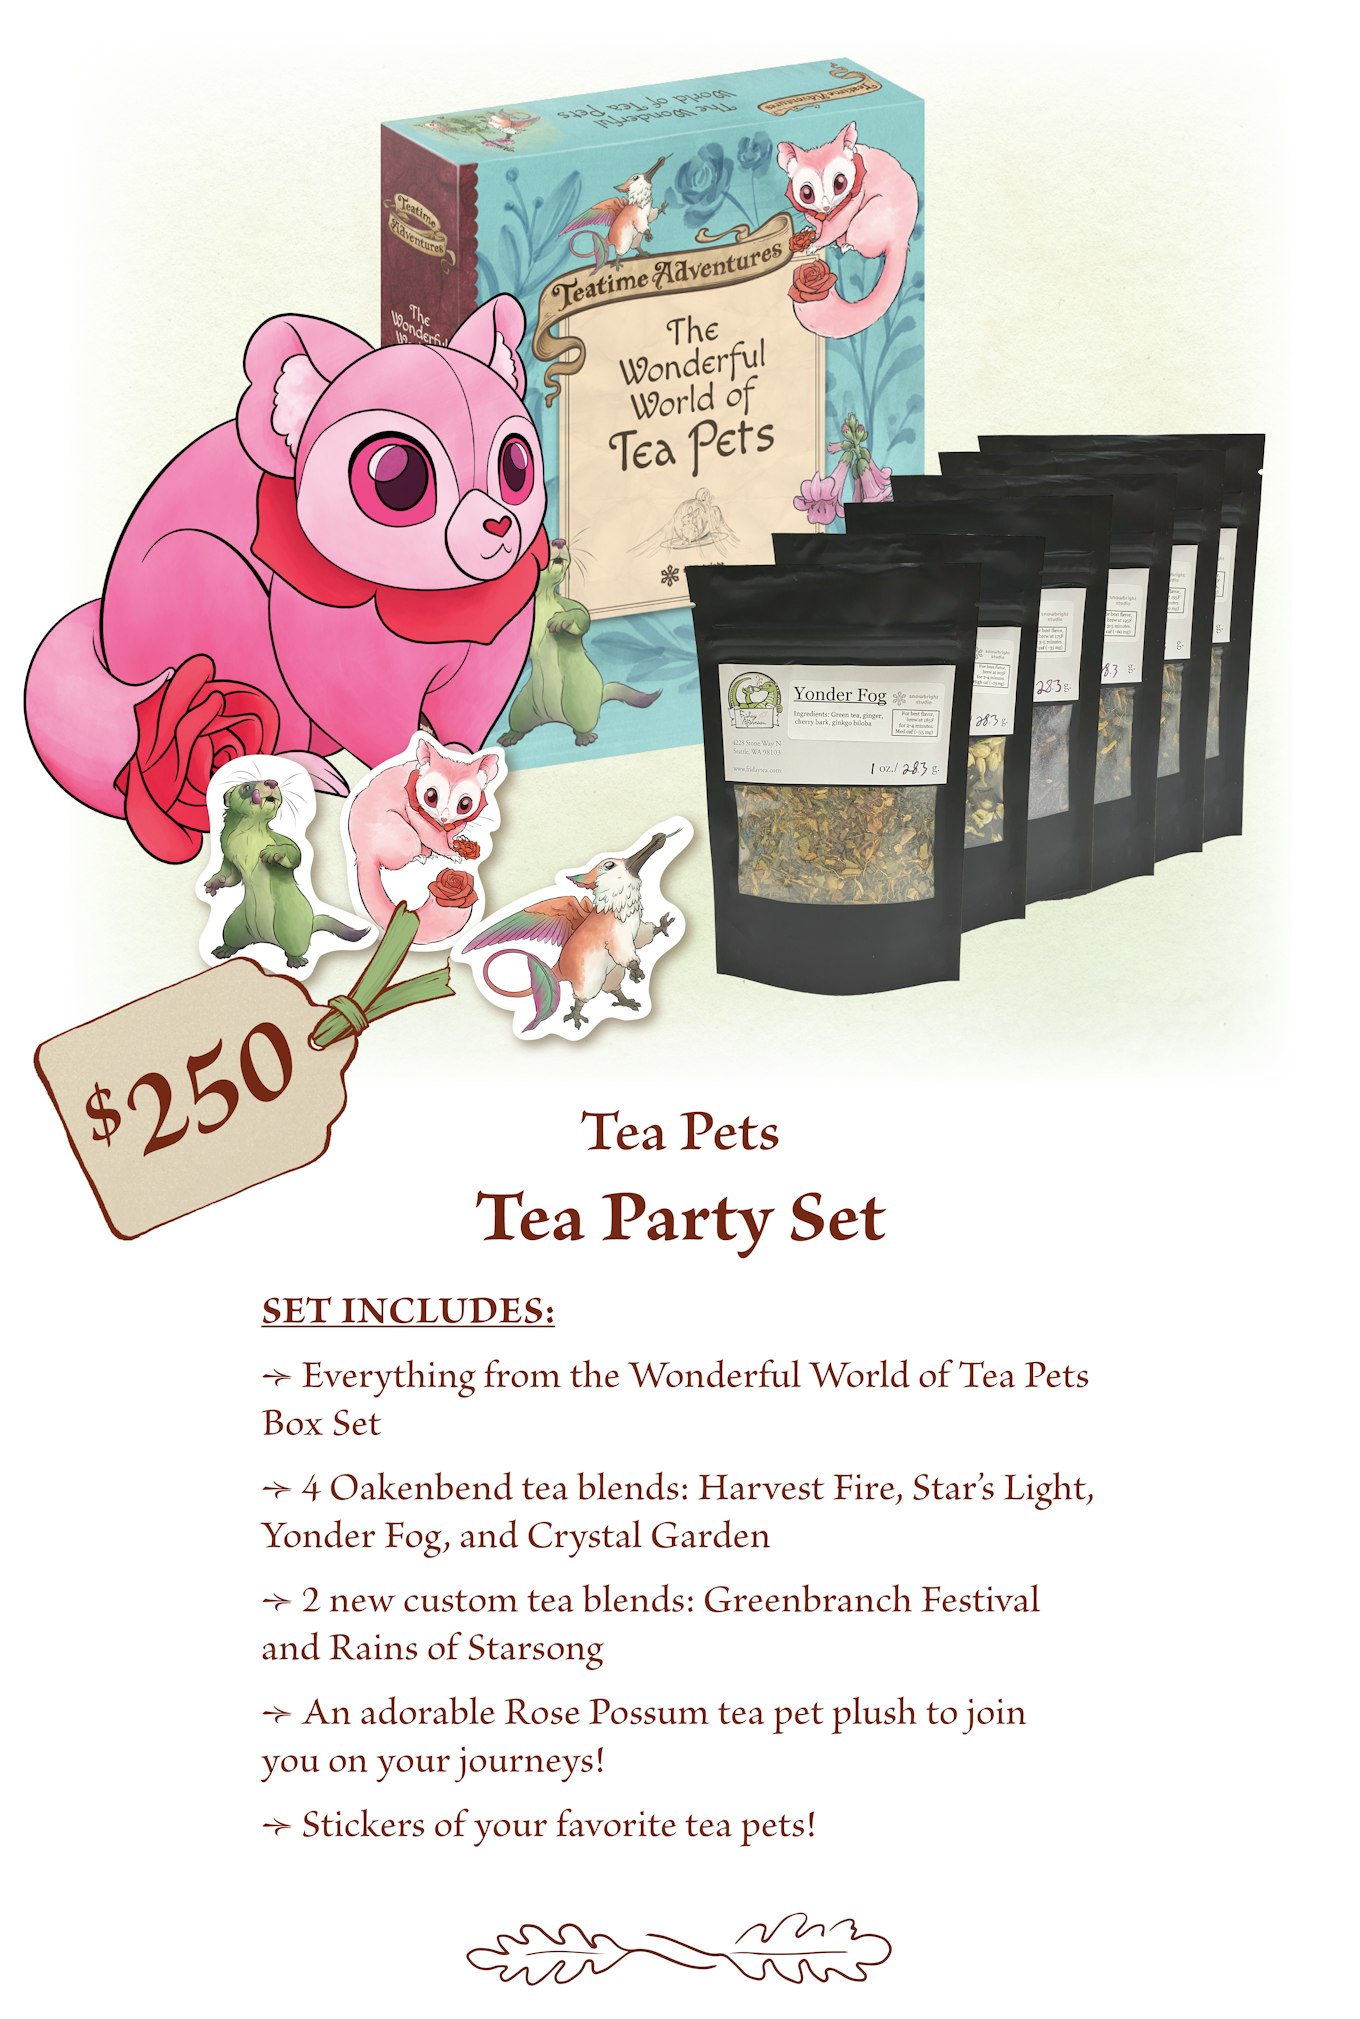 $250 - Tea Party Set (The Wonderful World of Tea Pets Box Set + Tea) Everything from the Wonderful World of Tea Pets Box Set. 4 Oakenbend tea blends: Harvest Fire, Star’s Light, Yonder Fog, and Crystal Garden.  2 new custom blends: Greenbranch Festival and Rains of Starsong.  An adorable Rose Possum tea pet plush to join you on your journeys!  Stickers of your favorite tea pets!